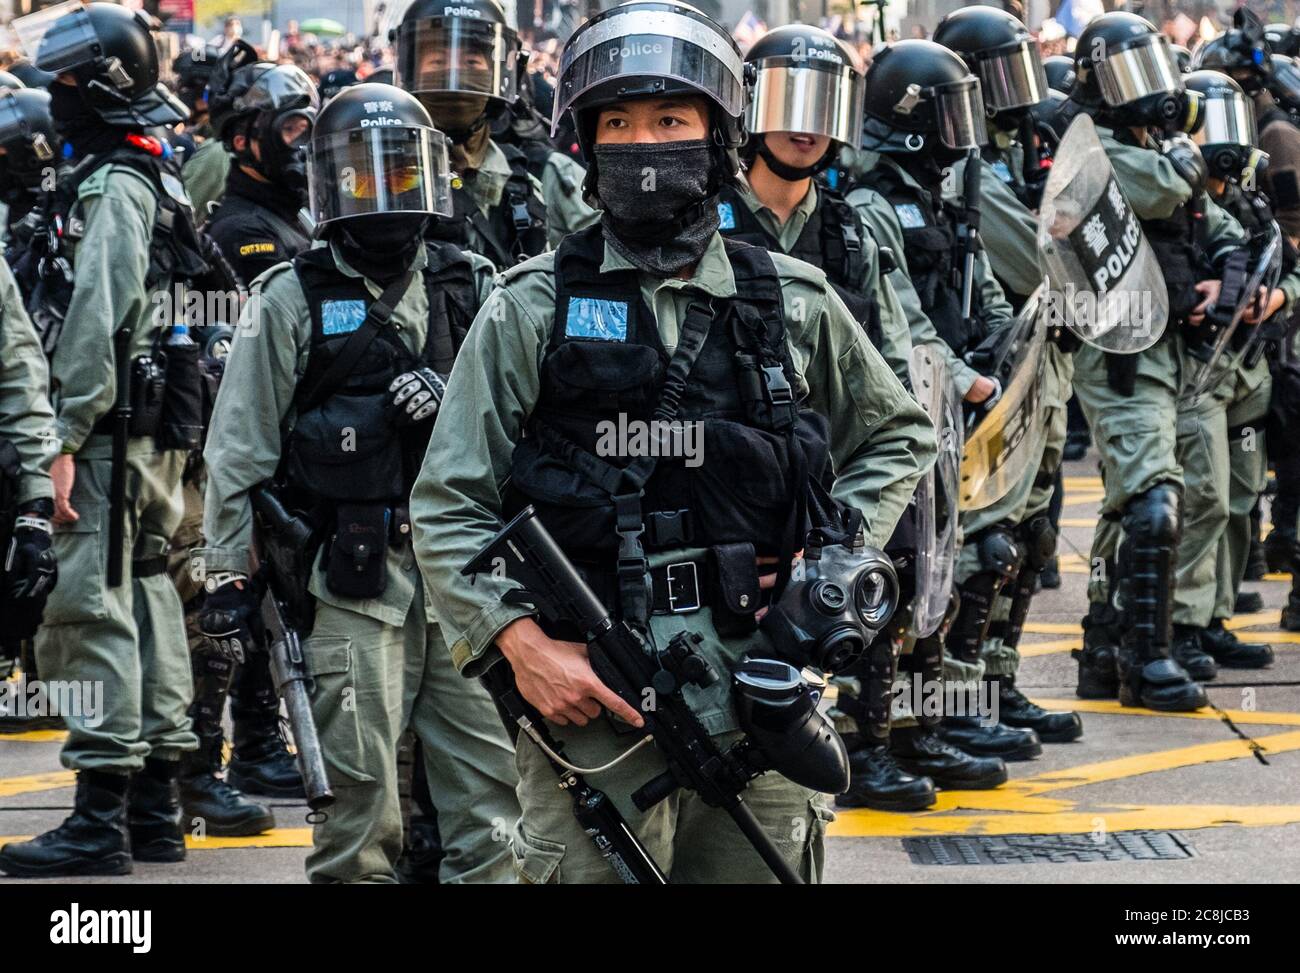 HongKong - December 01, 2019: Riot Police on demonstration during the 2019 protests, a series of demonstrations in Hongkong started as the Anti-Extrad Stock Photo